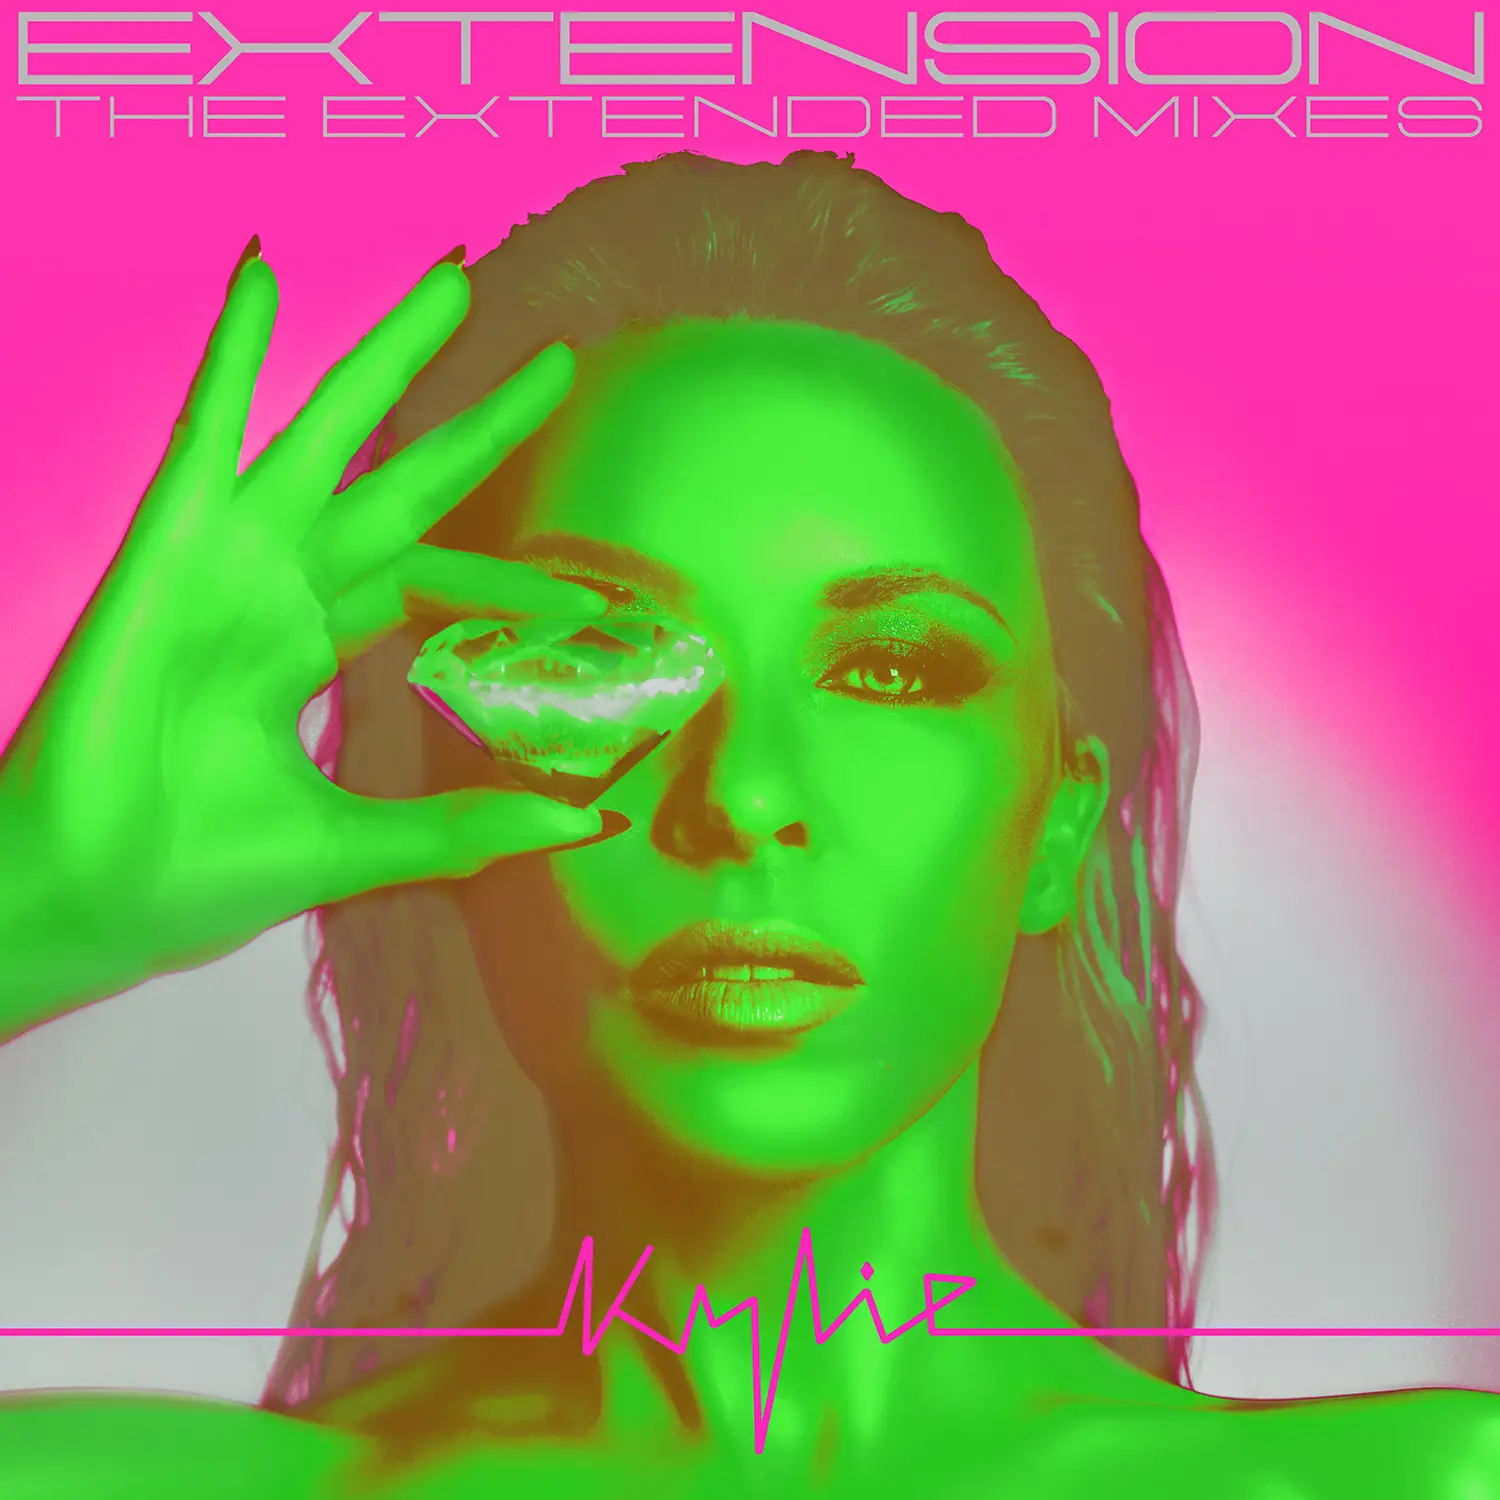 Kylie Minogue - Extension (The Extended Mixes) artwork